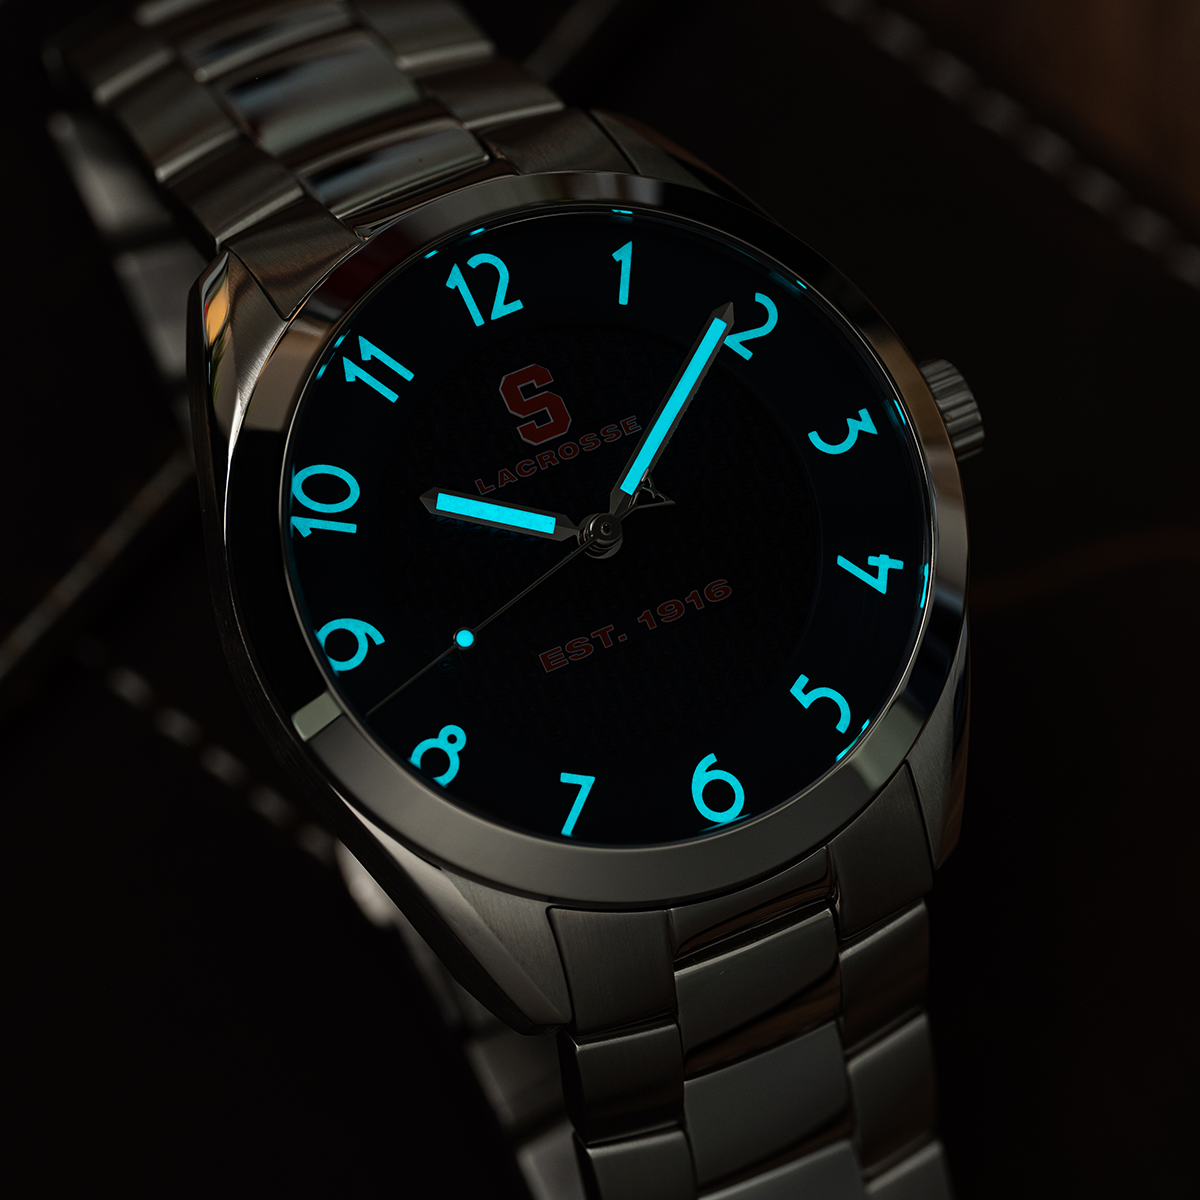 Syracuse lacrosse Swiss made automatic watch. Lume view showing glow-in-the-dark capability..